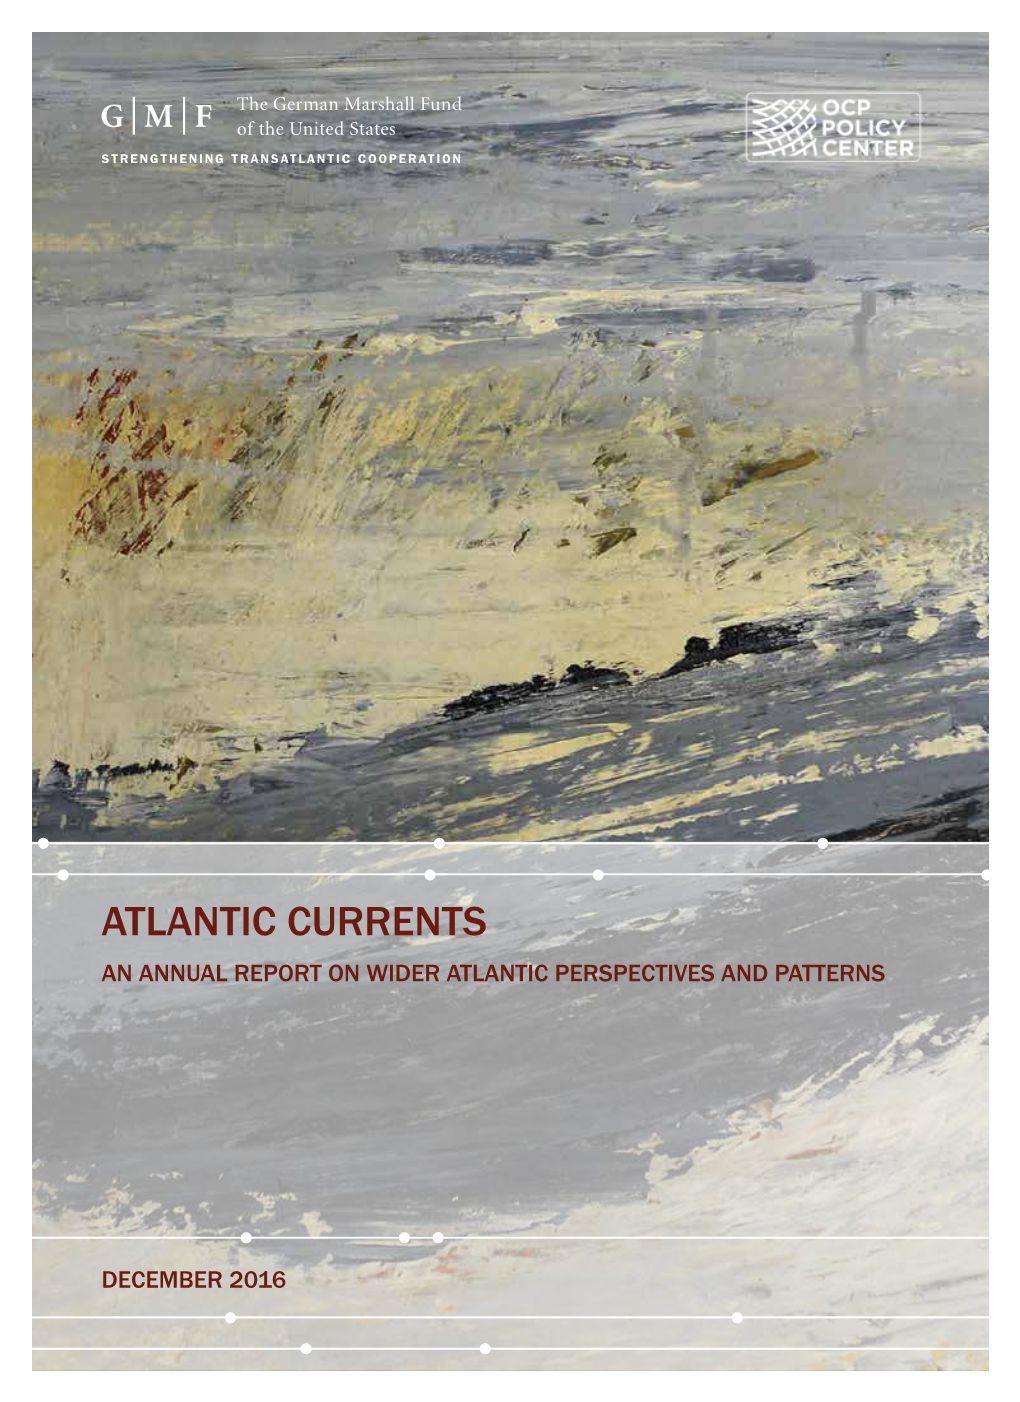 An Annual Report on Wider Atlantic Perspectives and Patterns